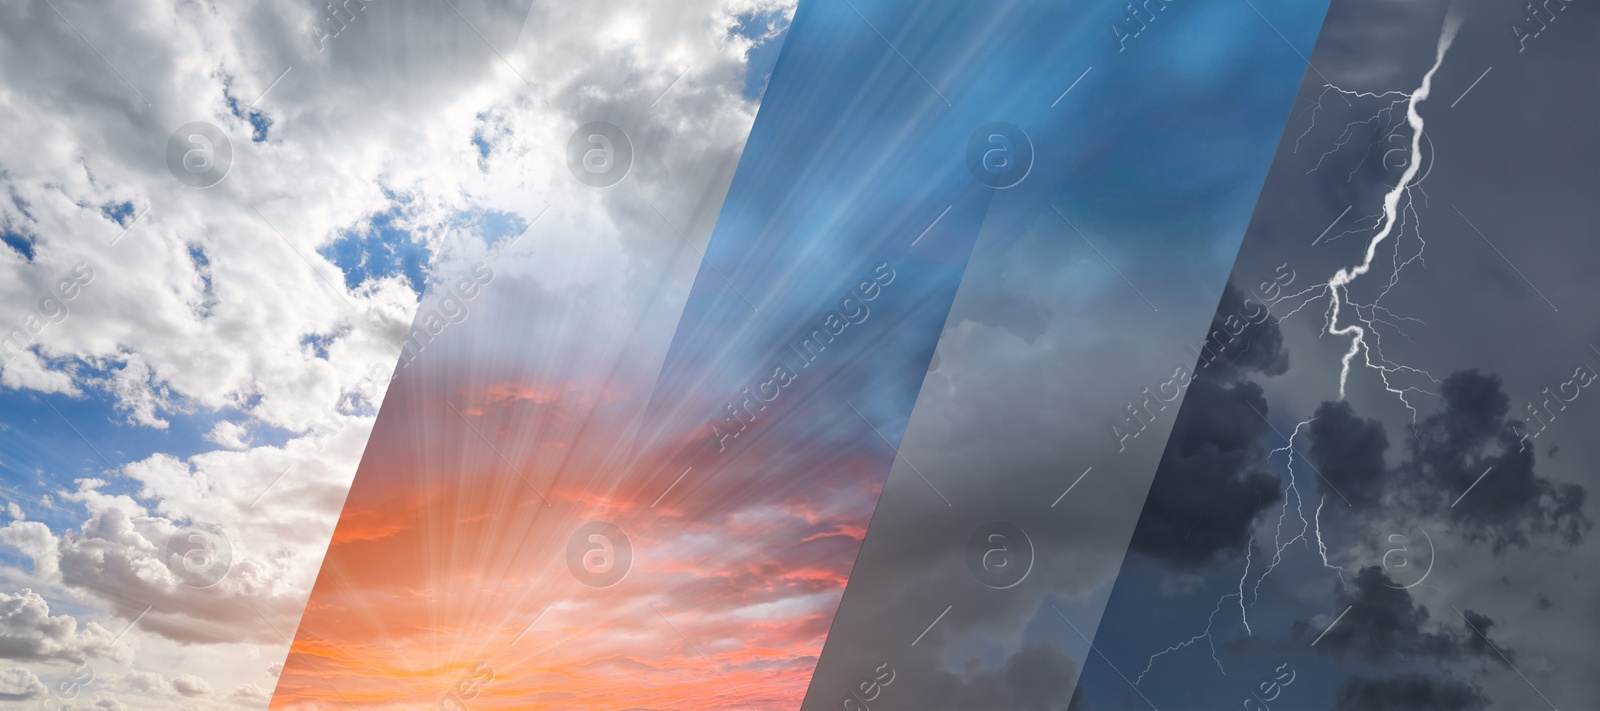 Image of Forecast concept. Collage of photos with different weather conditions, banner design